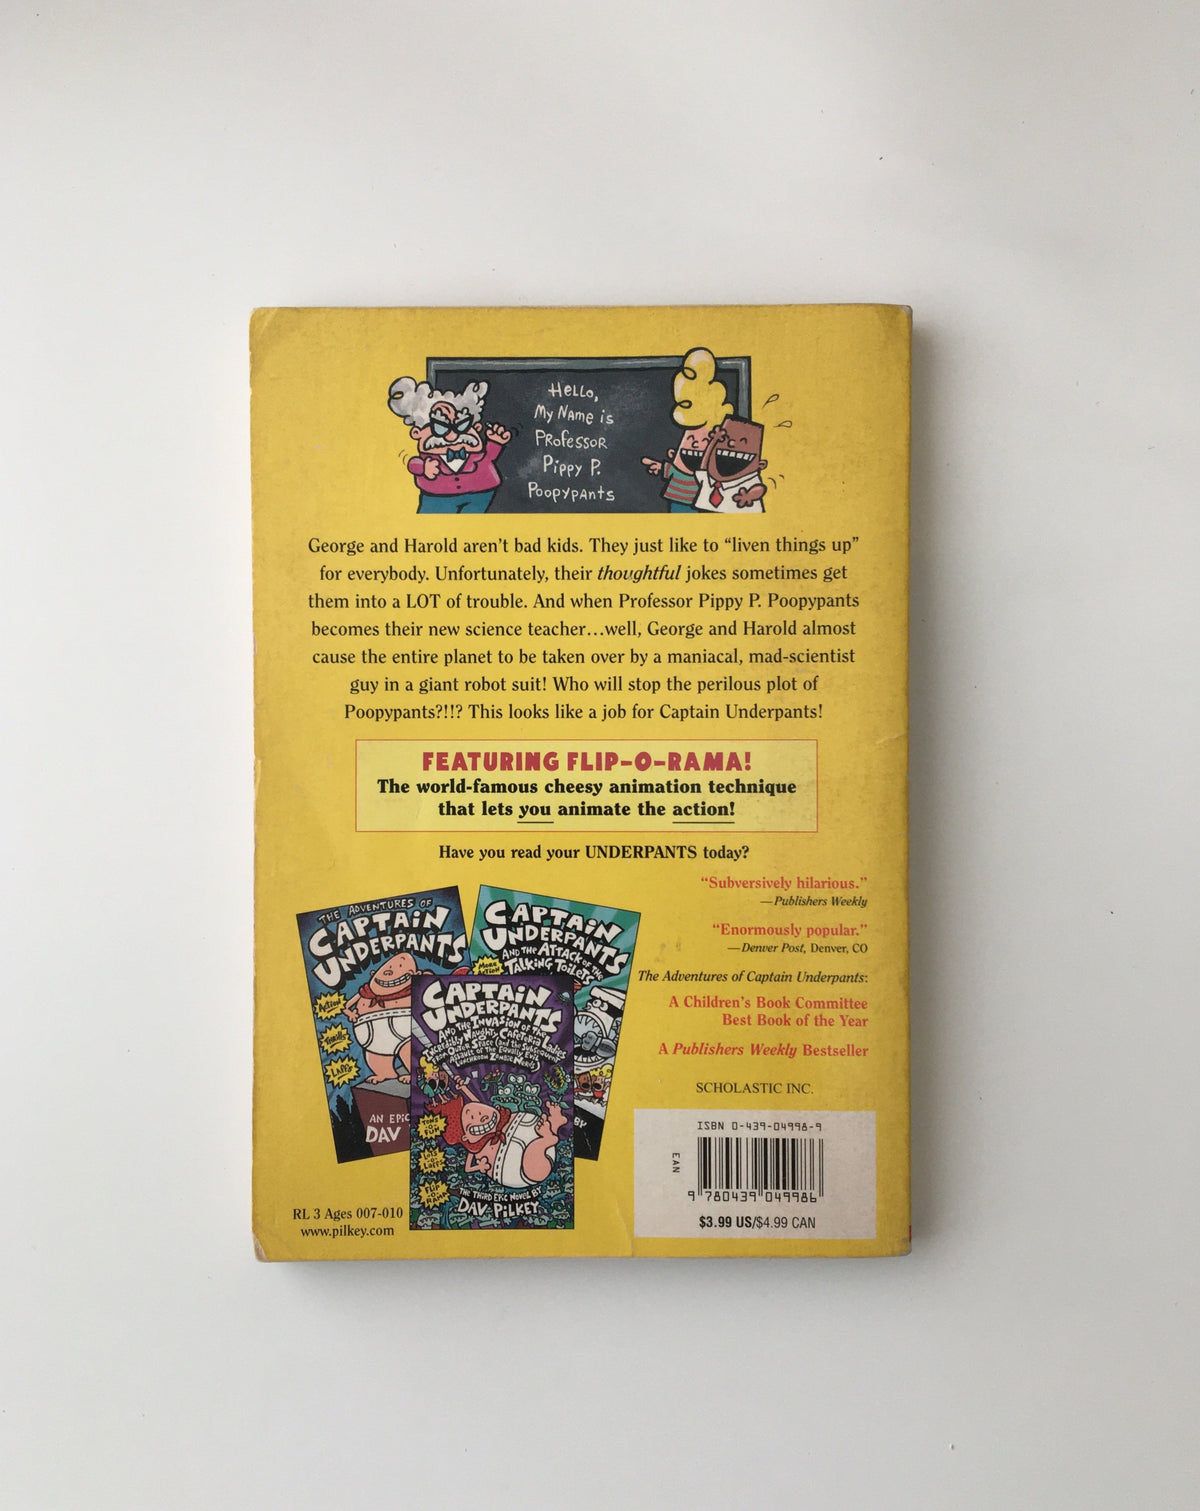 The Adventures of Captain Underpants: and The Perilous Plot of Professor Poopypants by Dav Pilkey